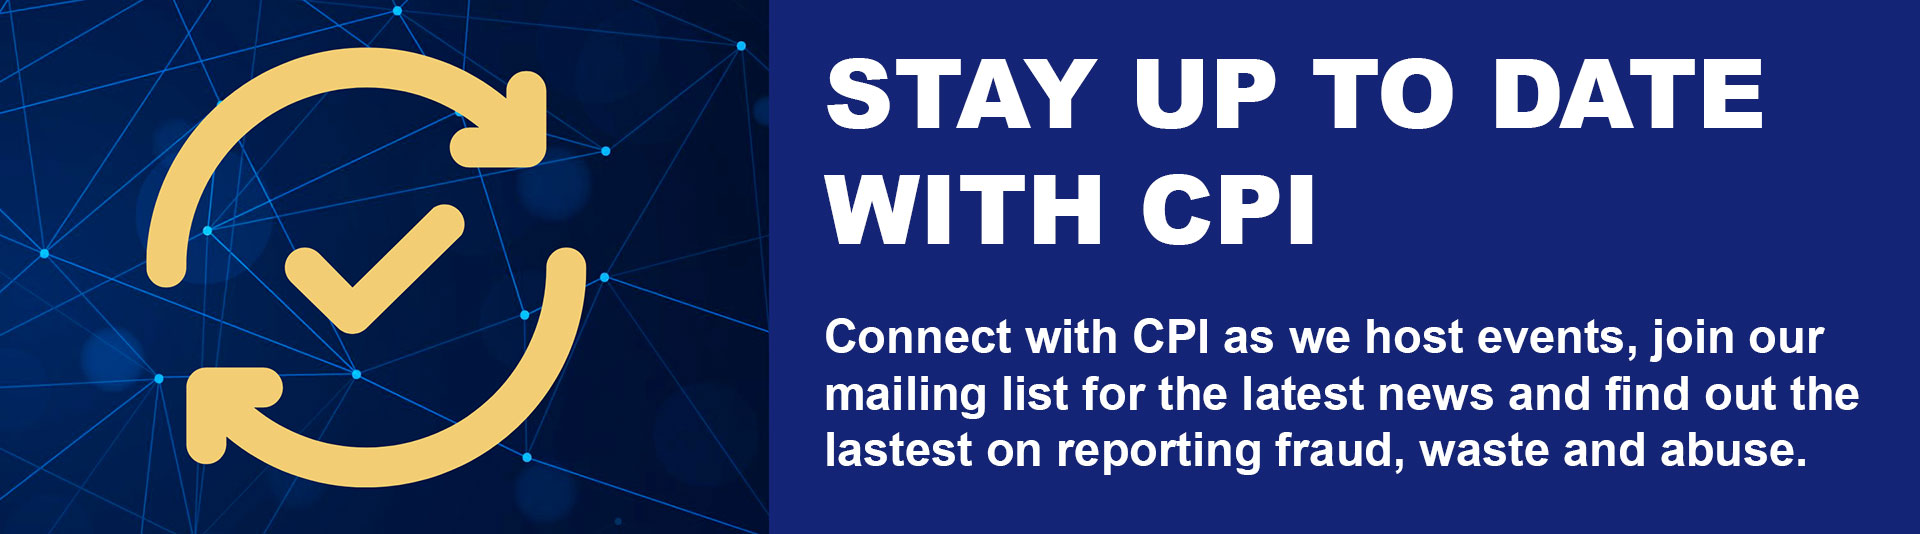 Stay up to date with CPI